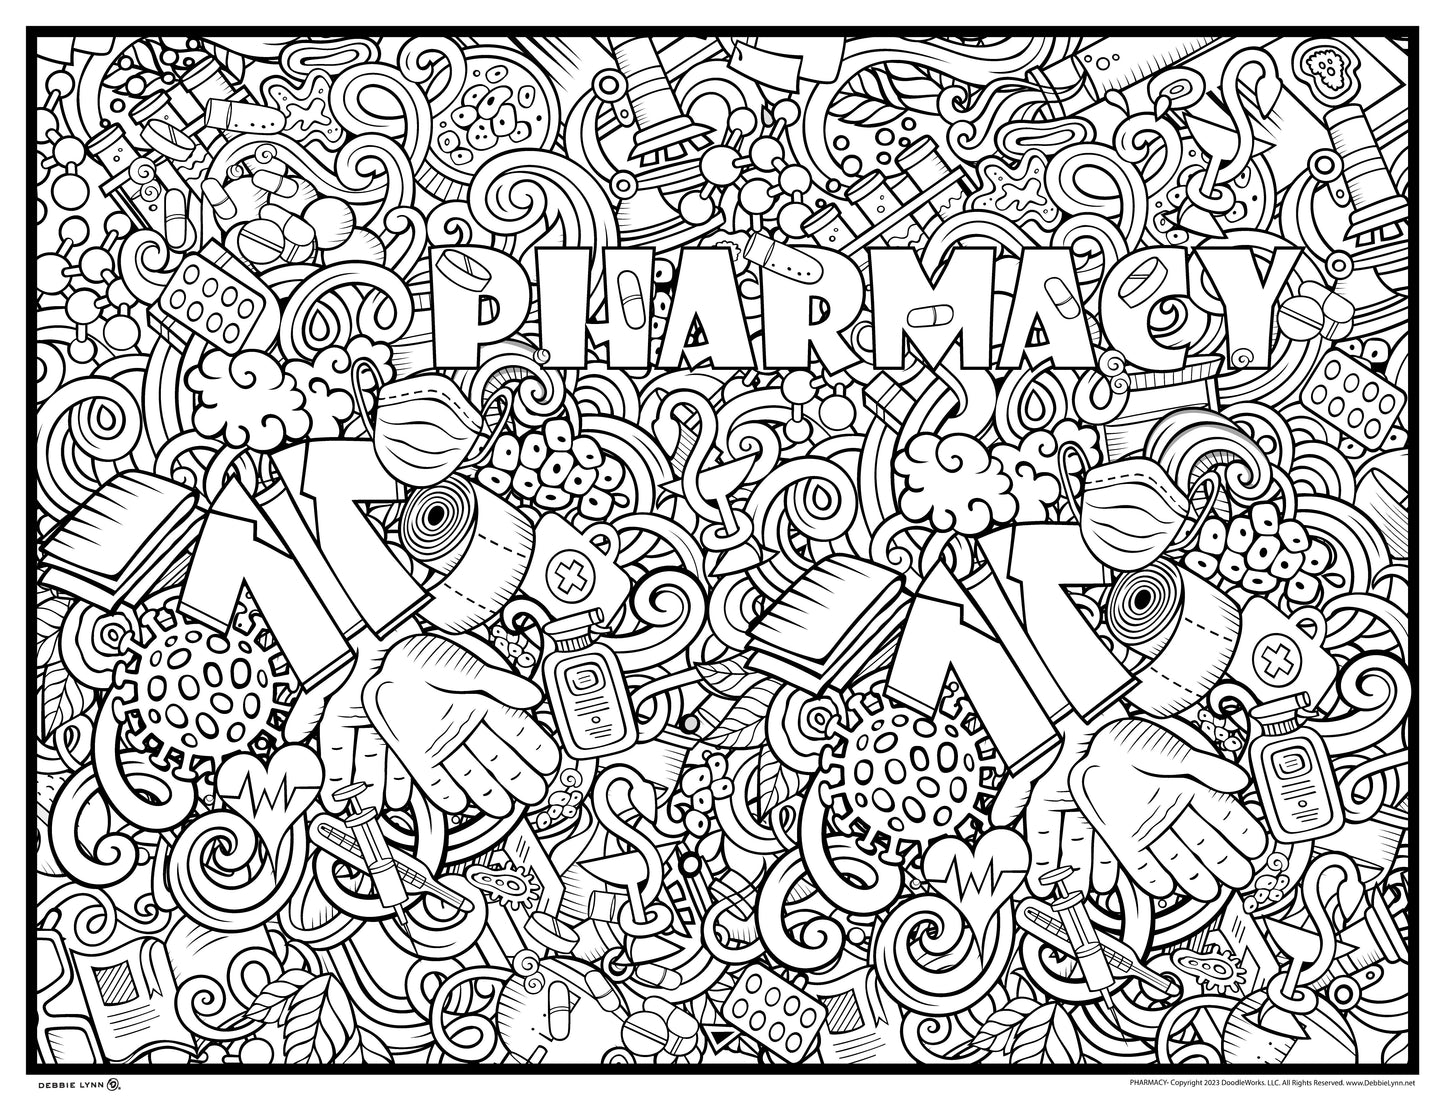 Pharmacy Tech Personalized Giant Coloring Poster 46"x60"